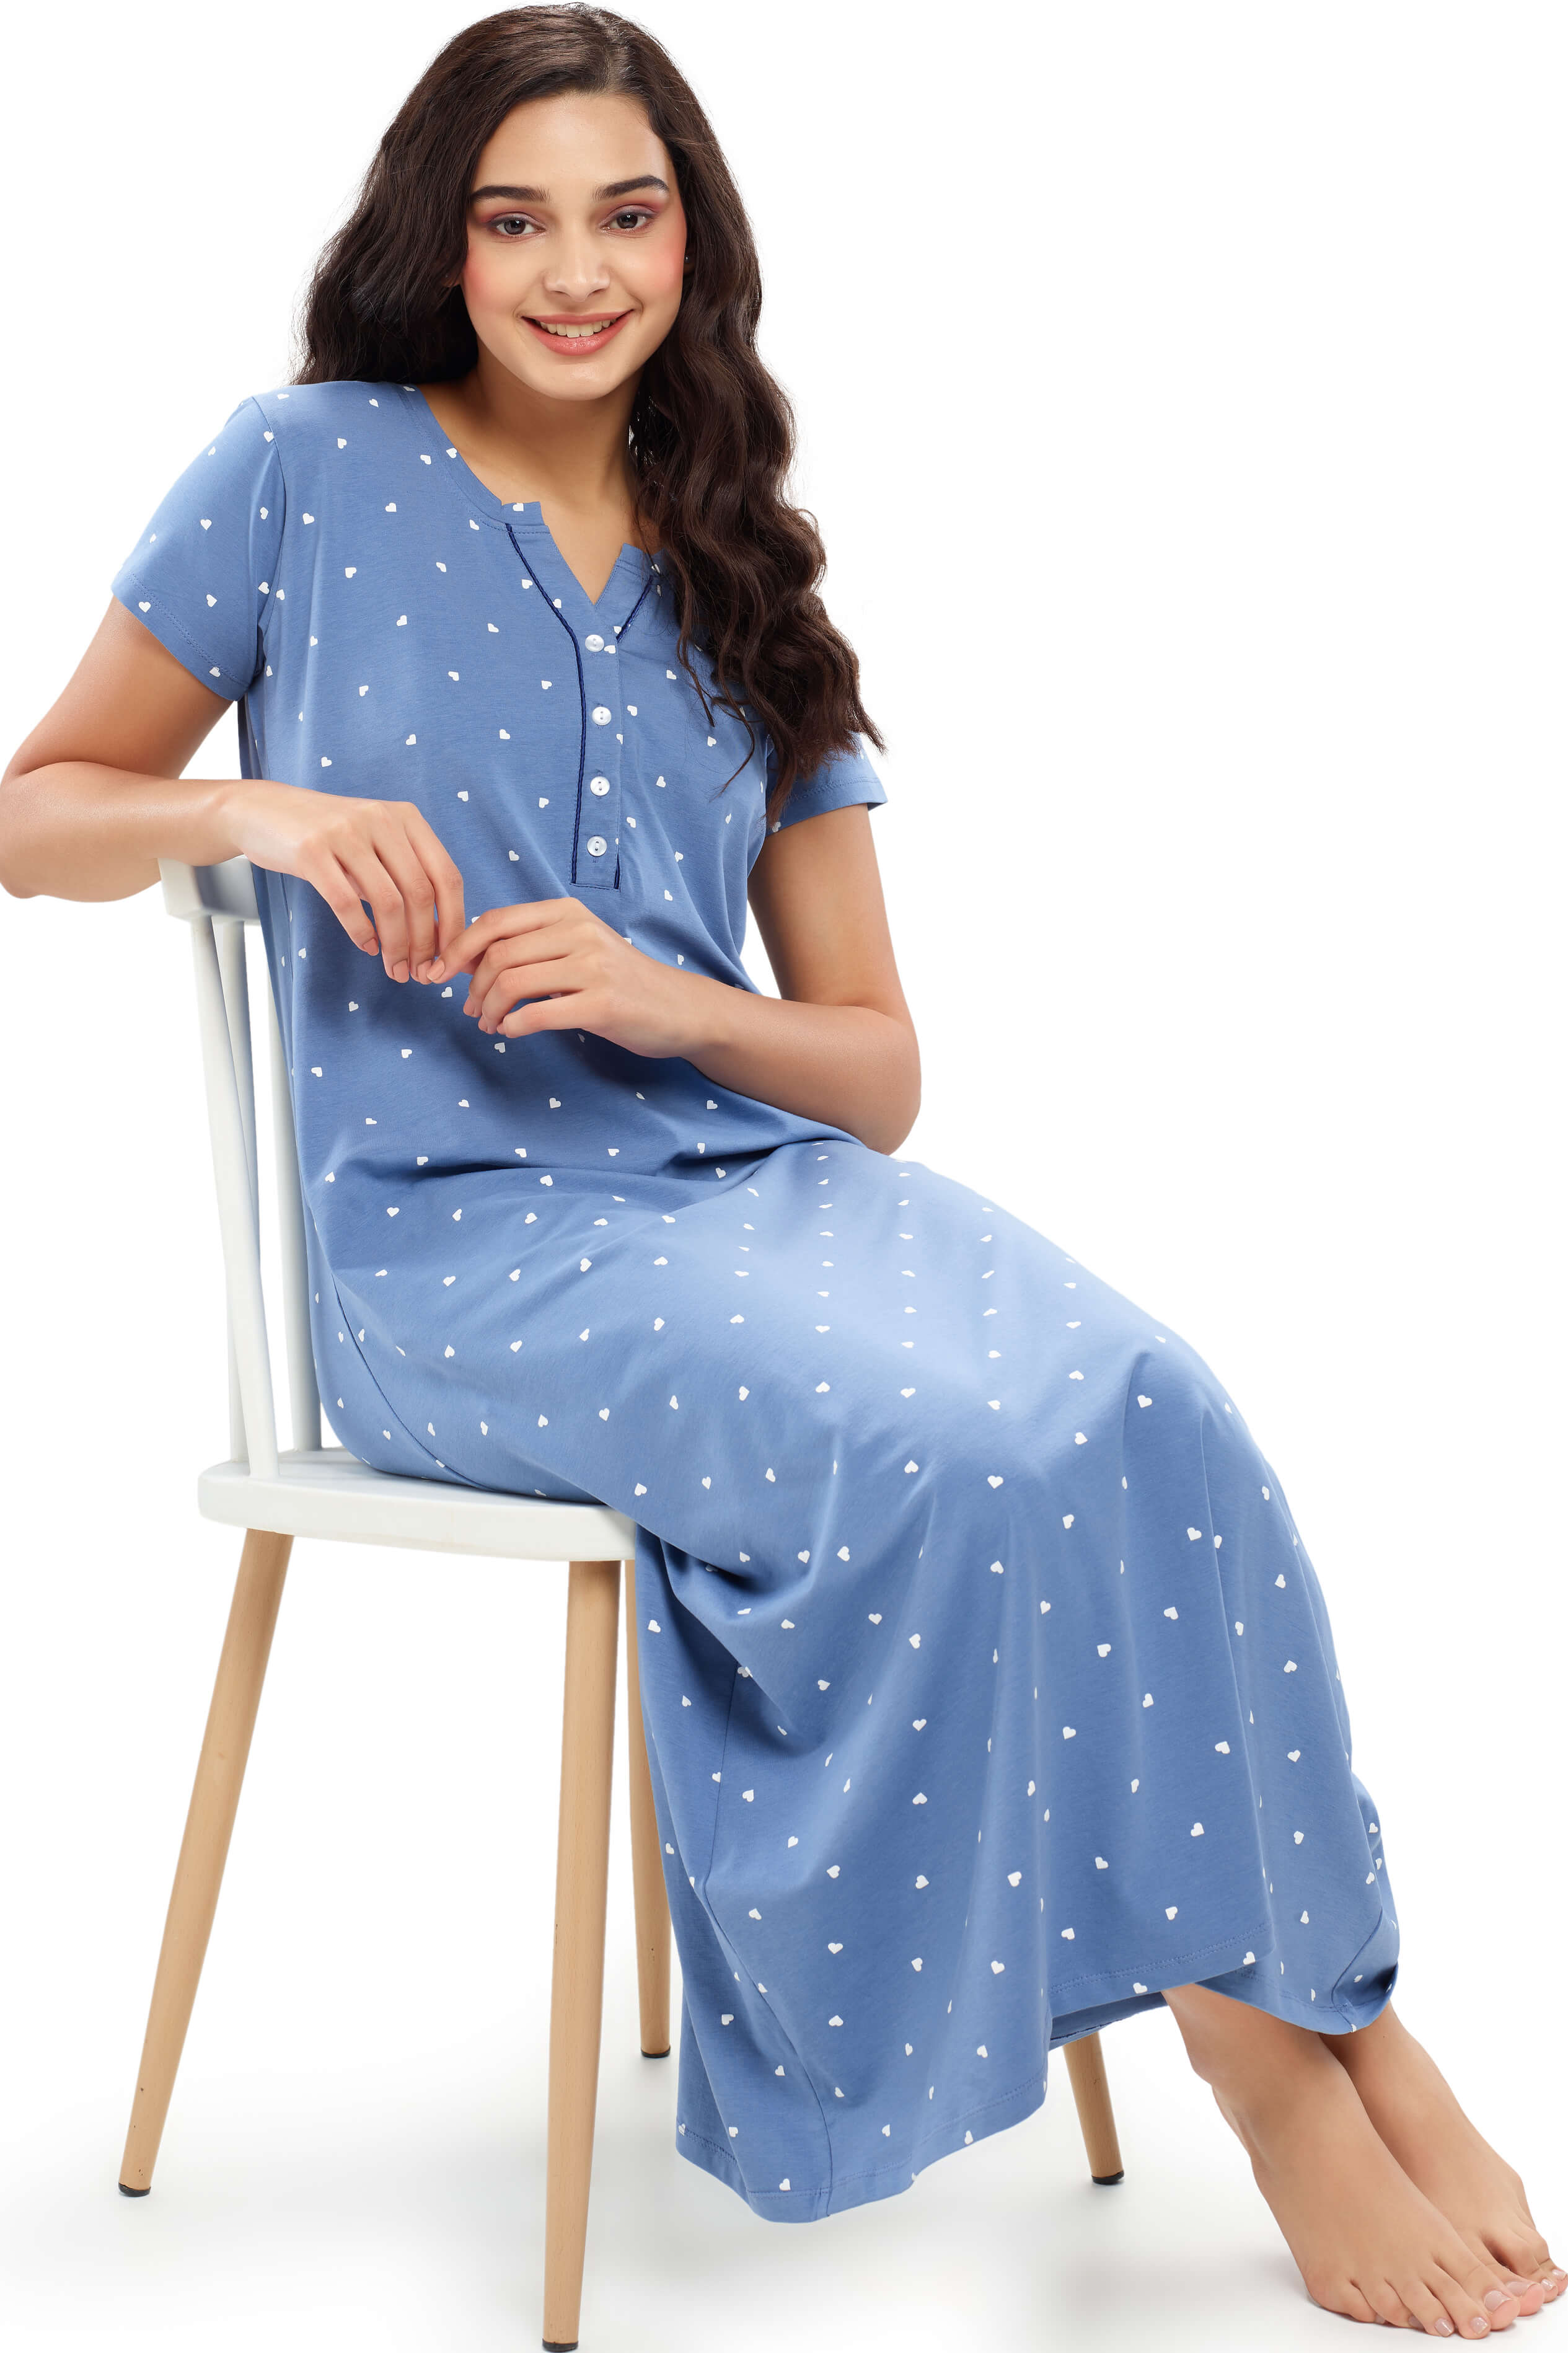 Cooling nightwear for hot sleepers | DAGSMEJAN STAY COOL